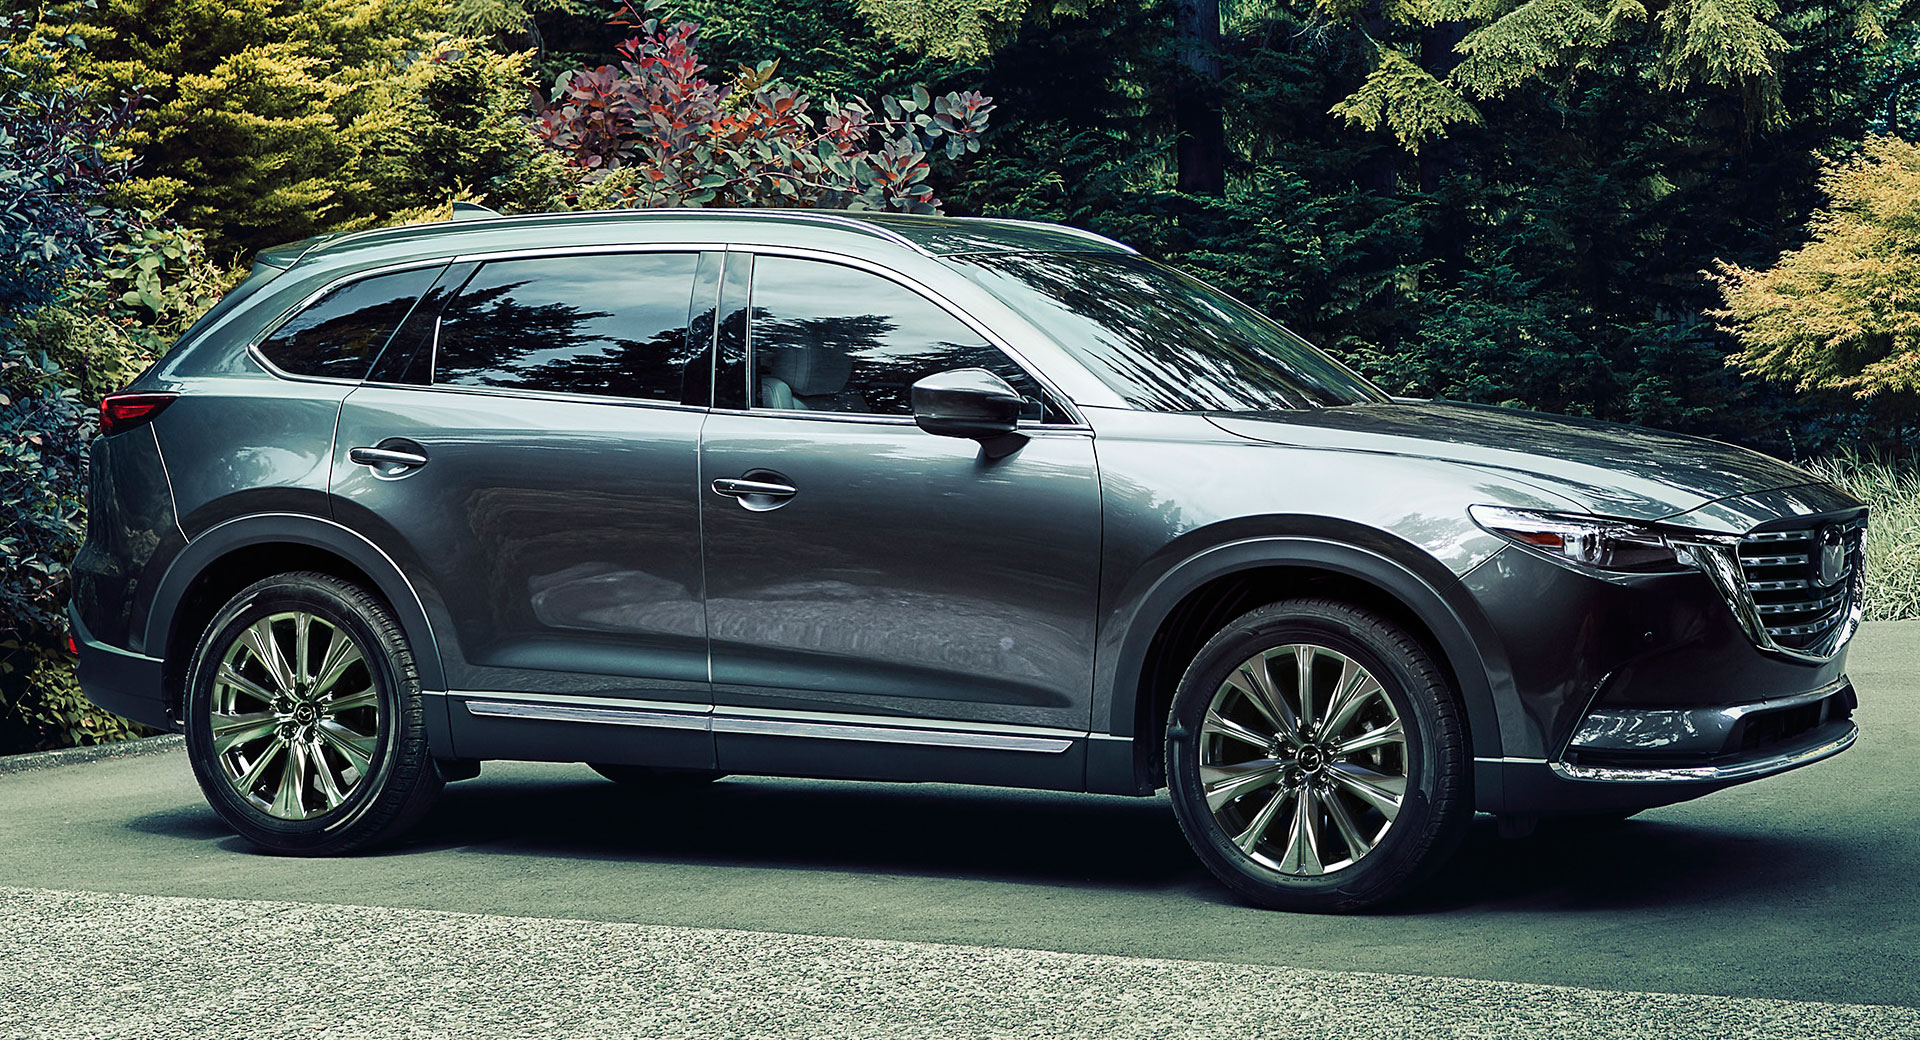 Mazda Drops Entry-Level CX-9 Sport For 2023, Crossover Now Starts $38,750 |  Carscoops